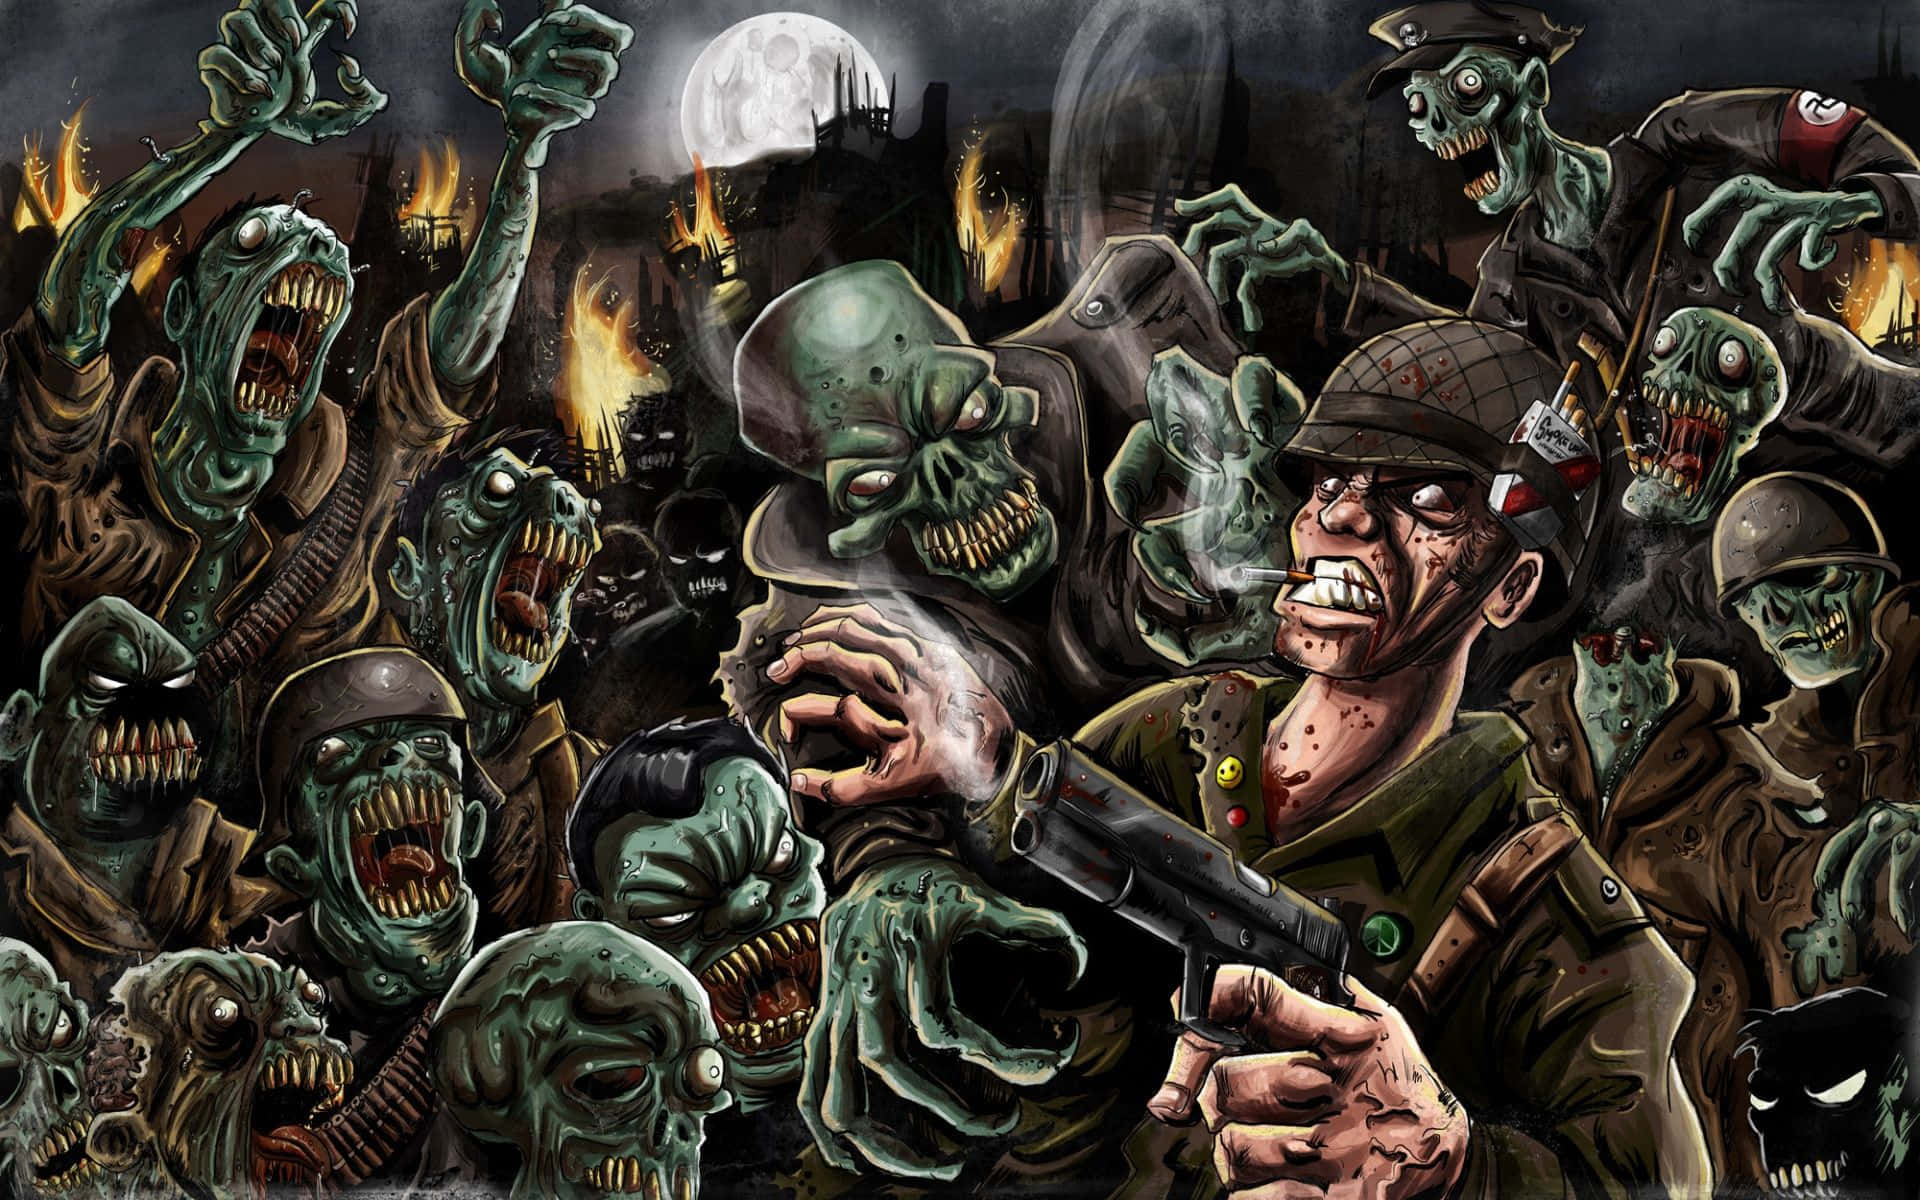 cool zombies and soldiers wallpaper